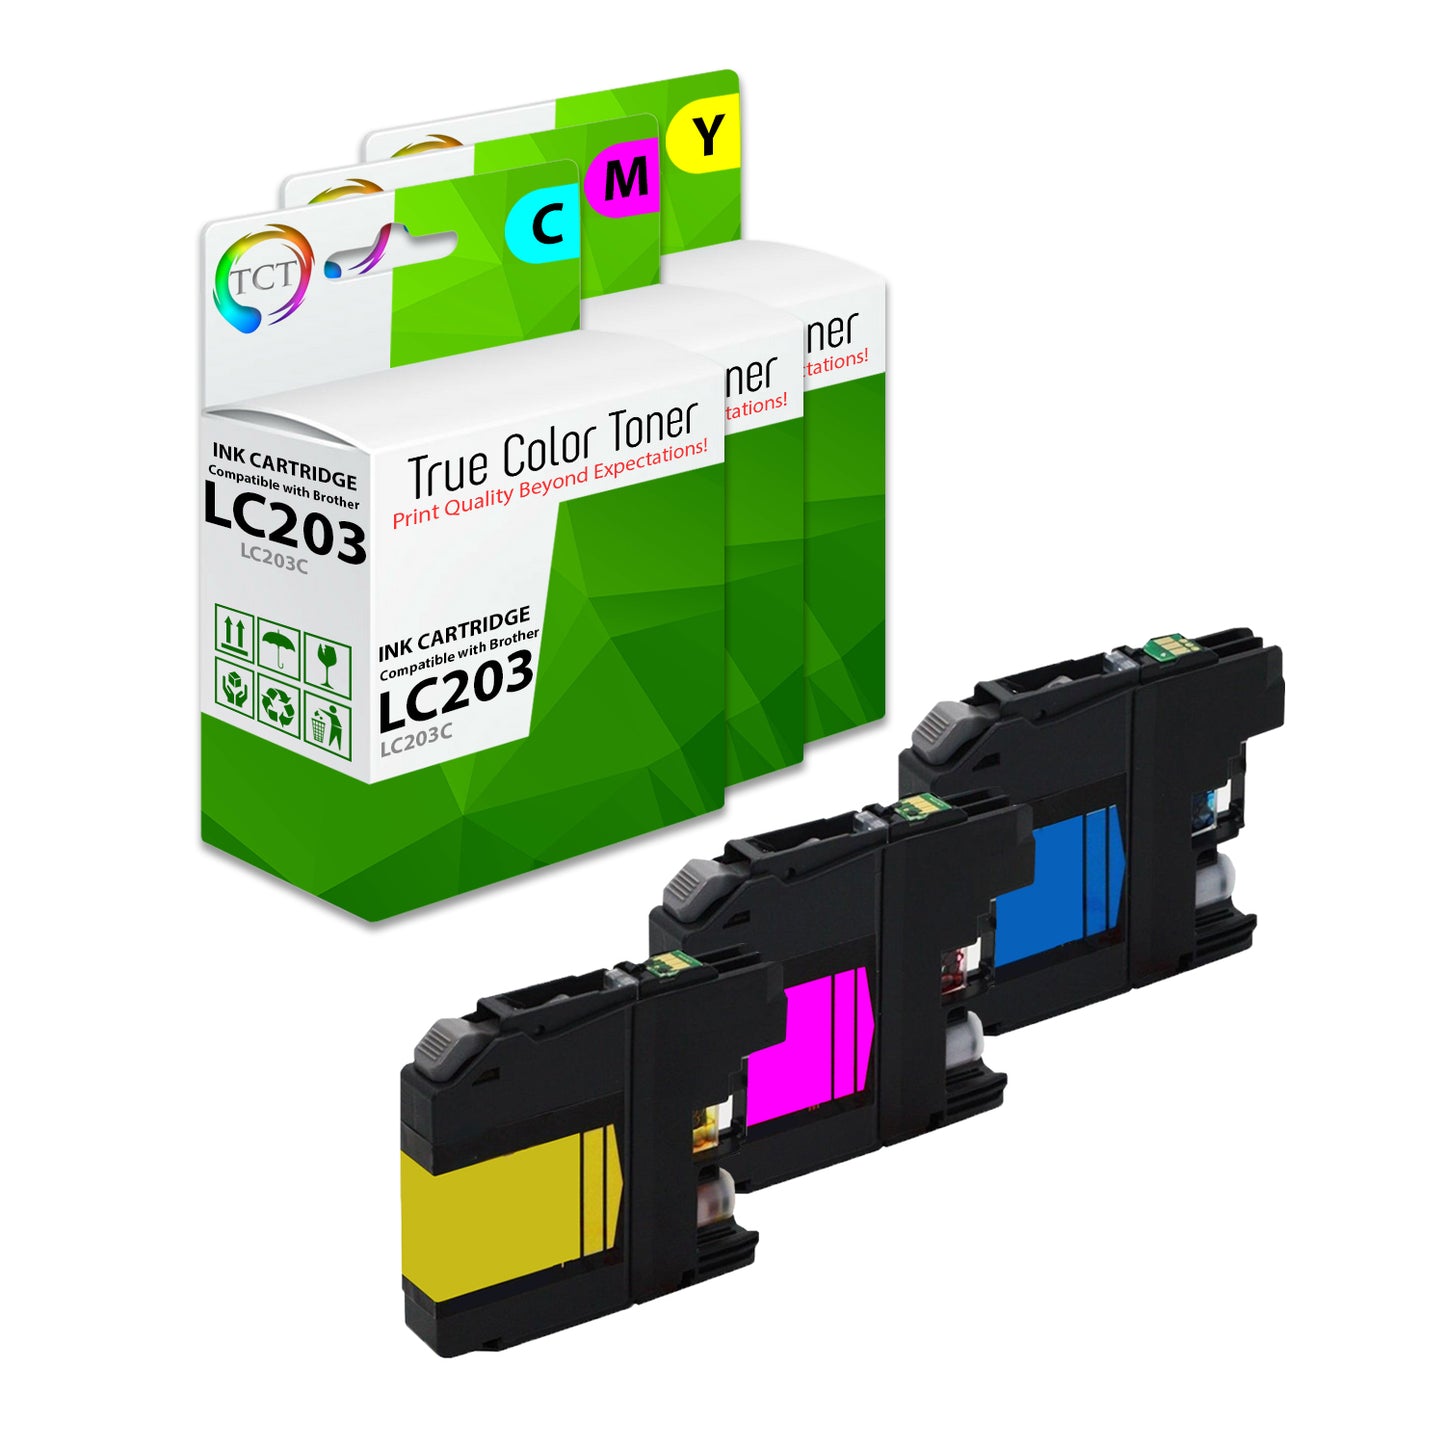 TCT Compatible Ink Cartridge Replacement for the Brother LC203 Series - 3 Pack (C, M, Y)